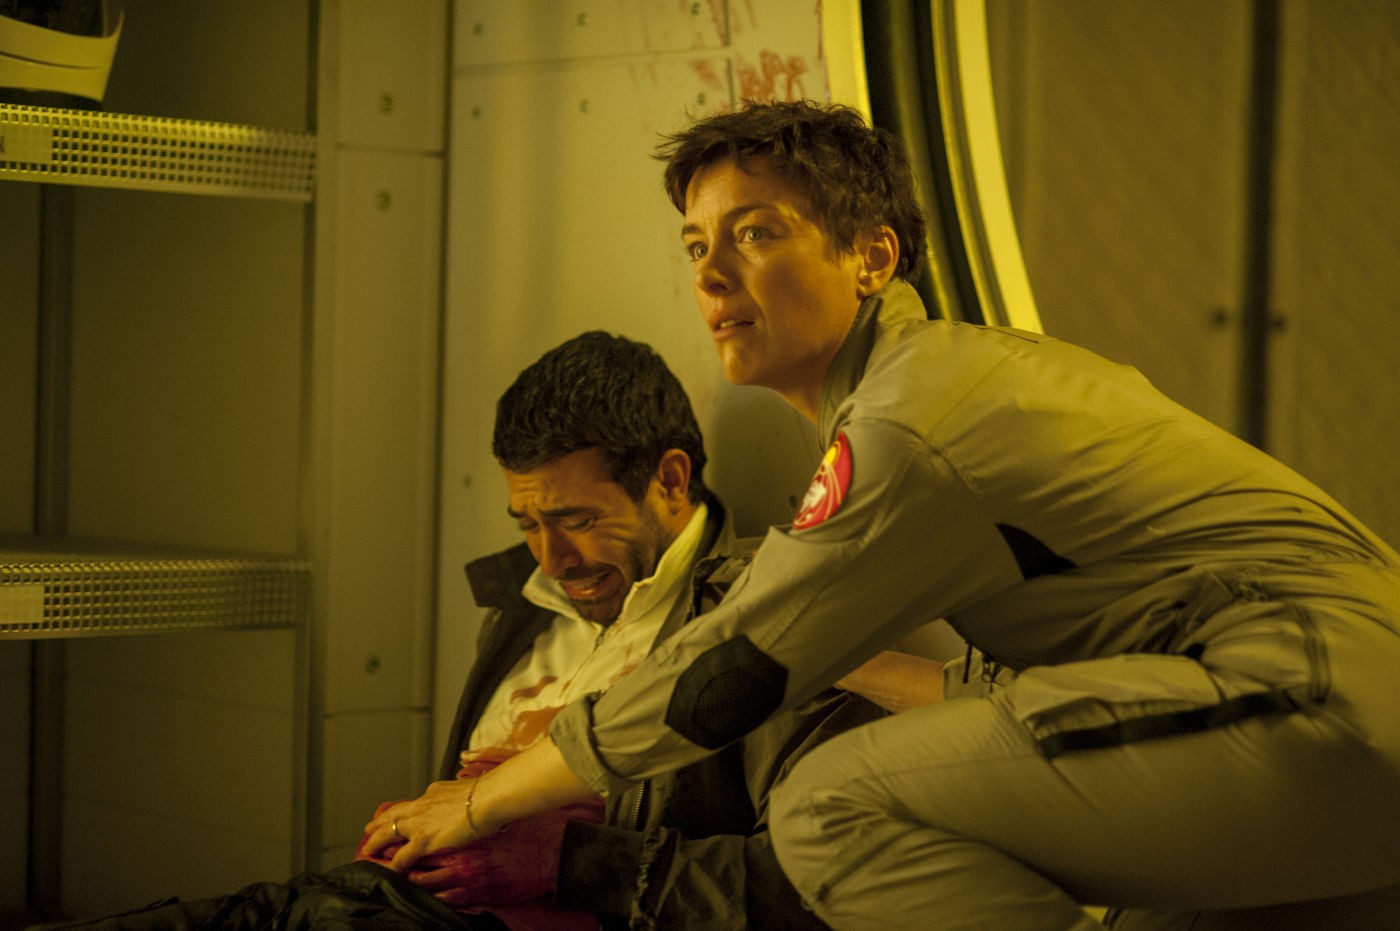 Tom Cullen stars as Richard Harrington and Olivia Williams stars as Kim Aldrich in Magnolia Pictures' The Last Days on Mars (2013)